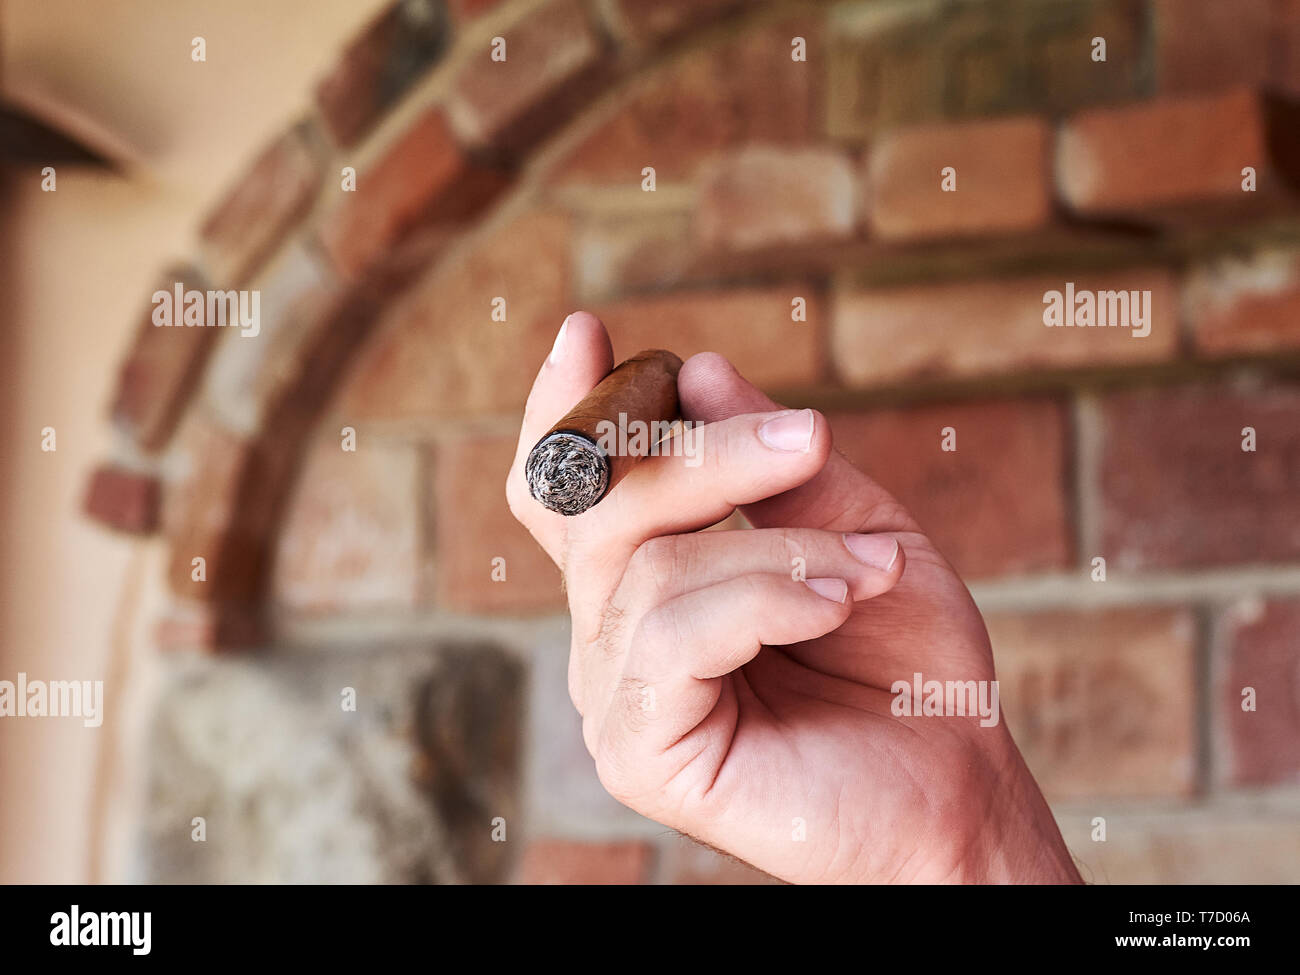 A man holds a burning cuban cigar in his hand and smoking. Smoker in front of defocused brick wall. Stock Photo